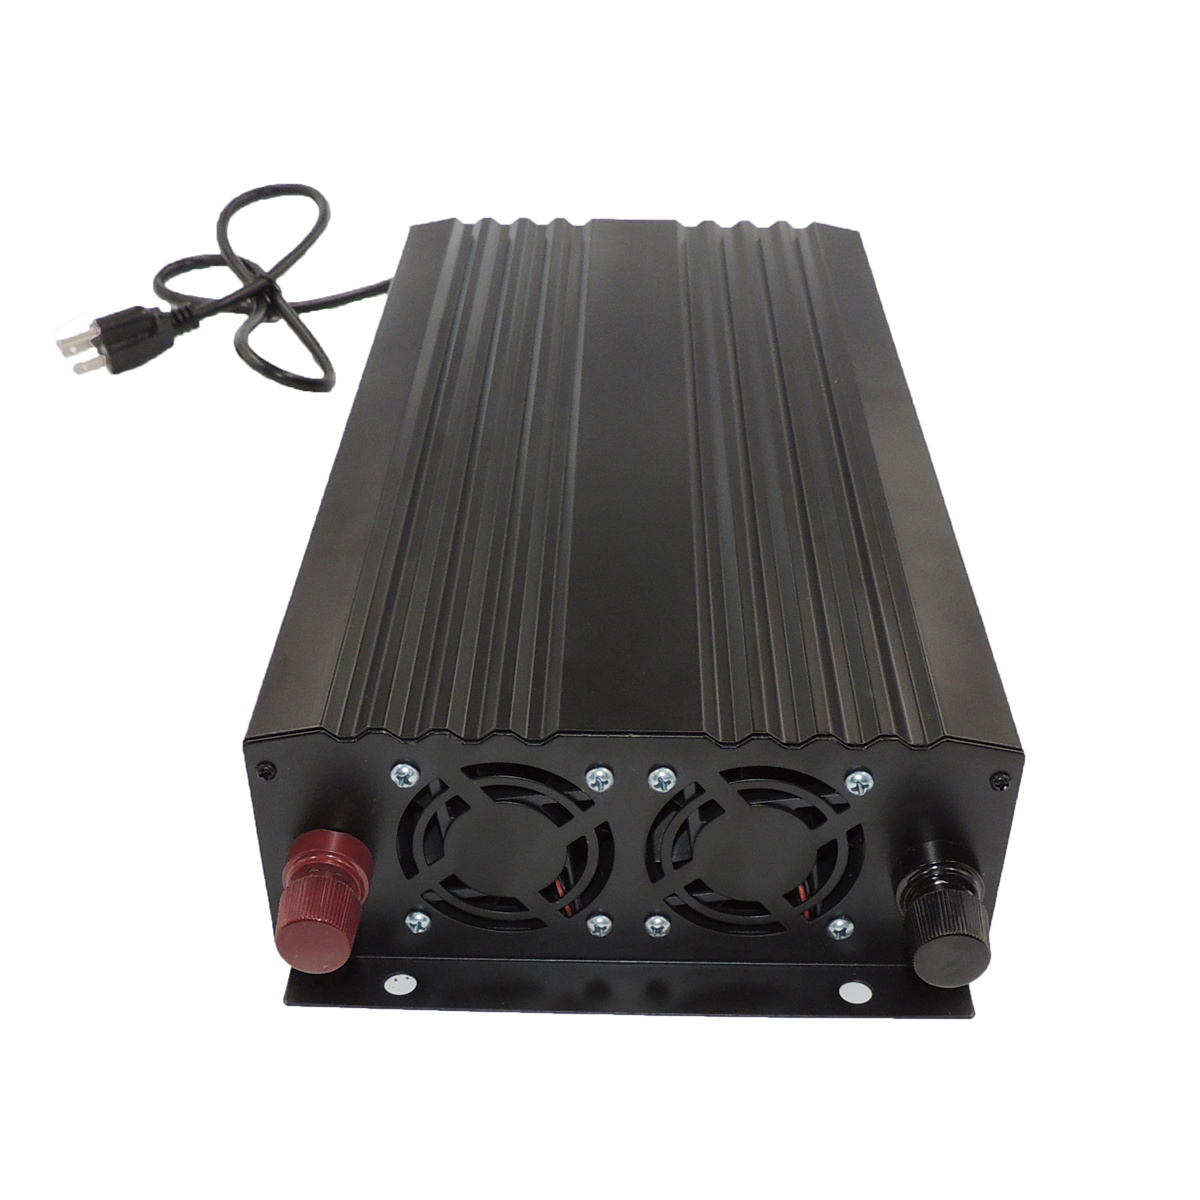 Off-grid tie High frequency DC 12V to AC 230V 1500W Pure Sine Wave Inverter with built-in 10A Charger with UPS function